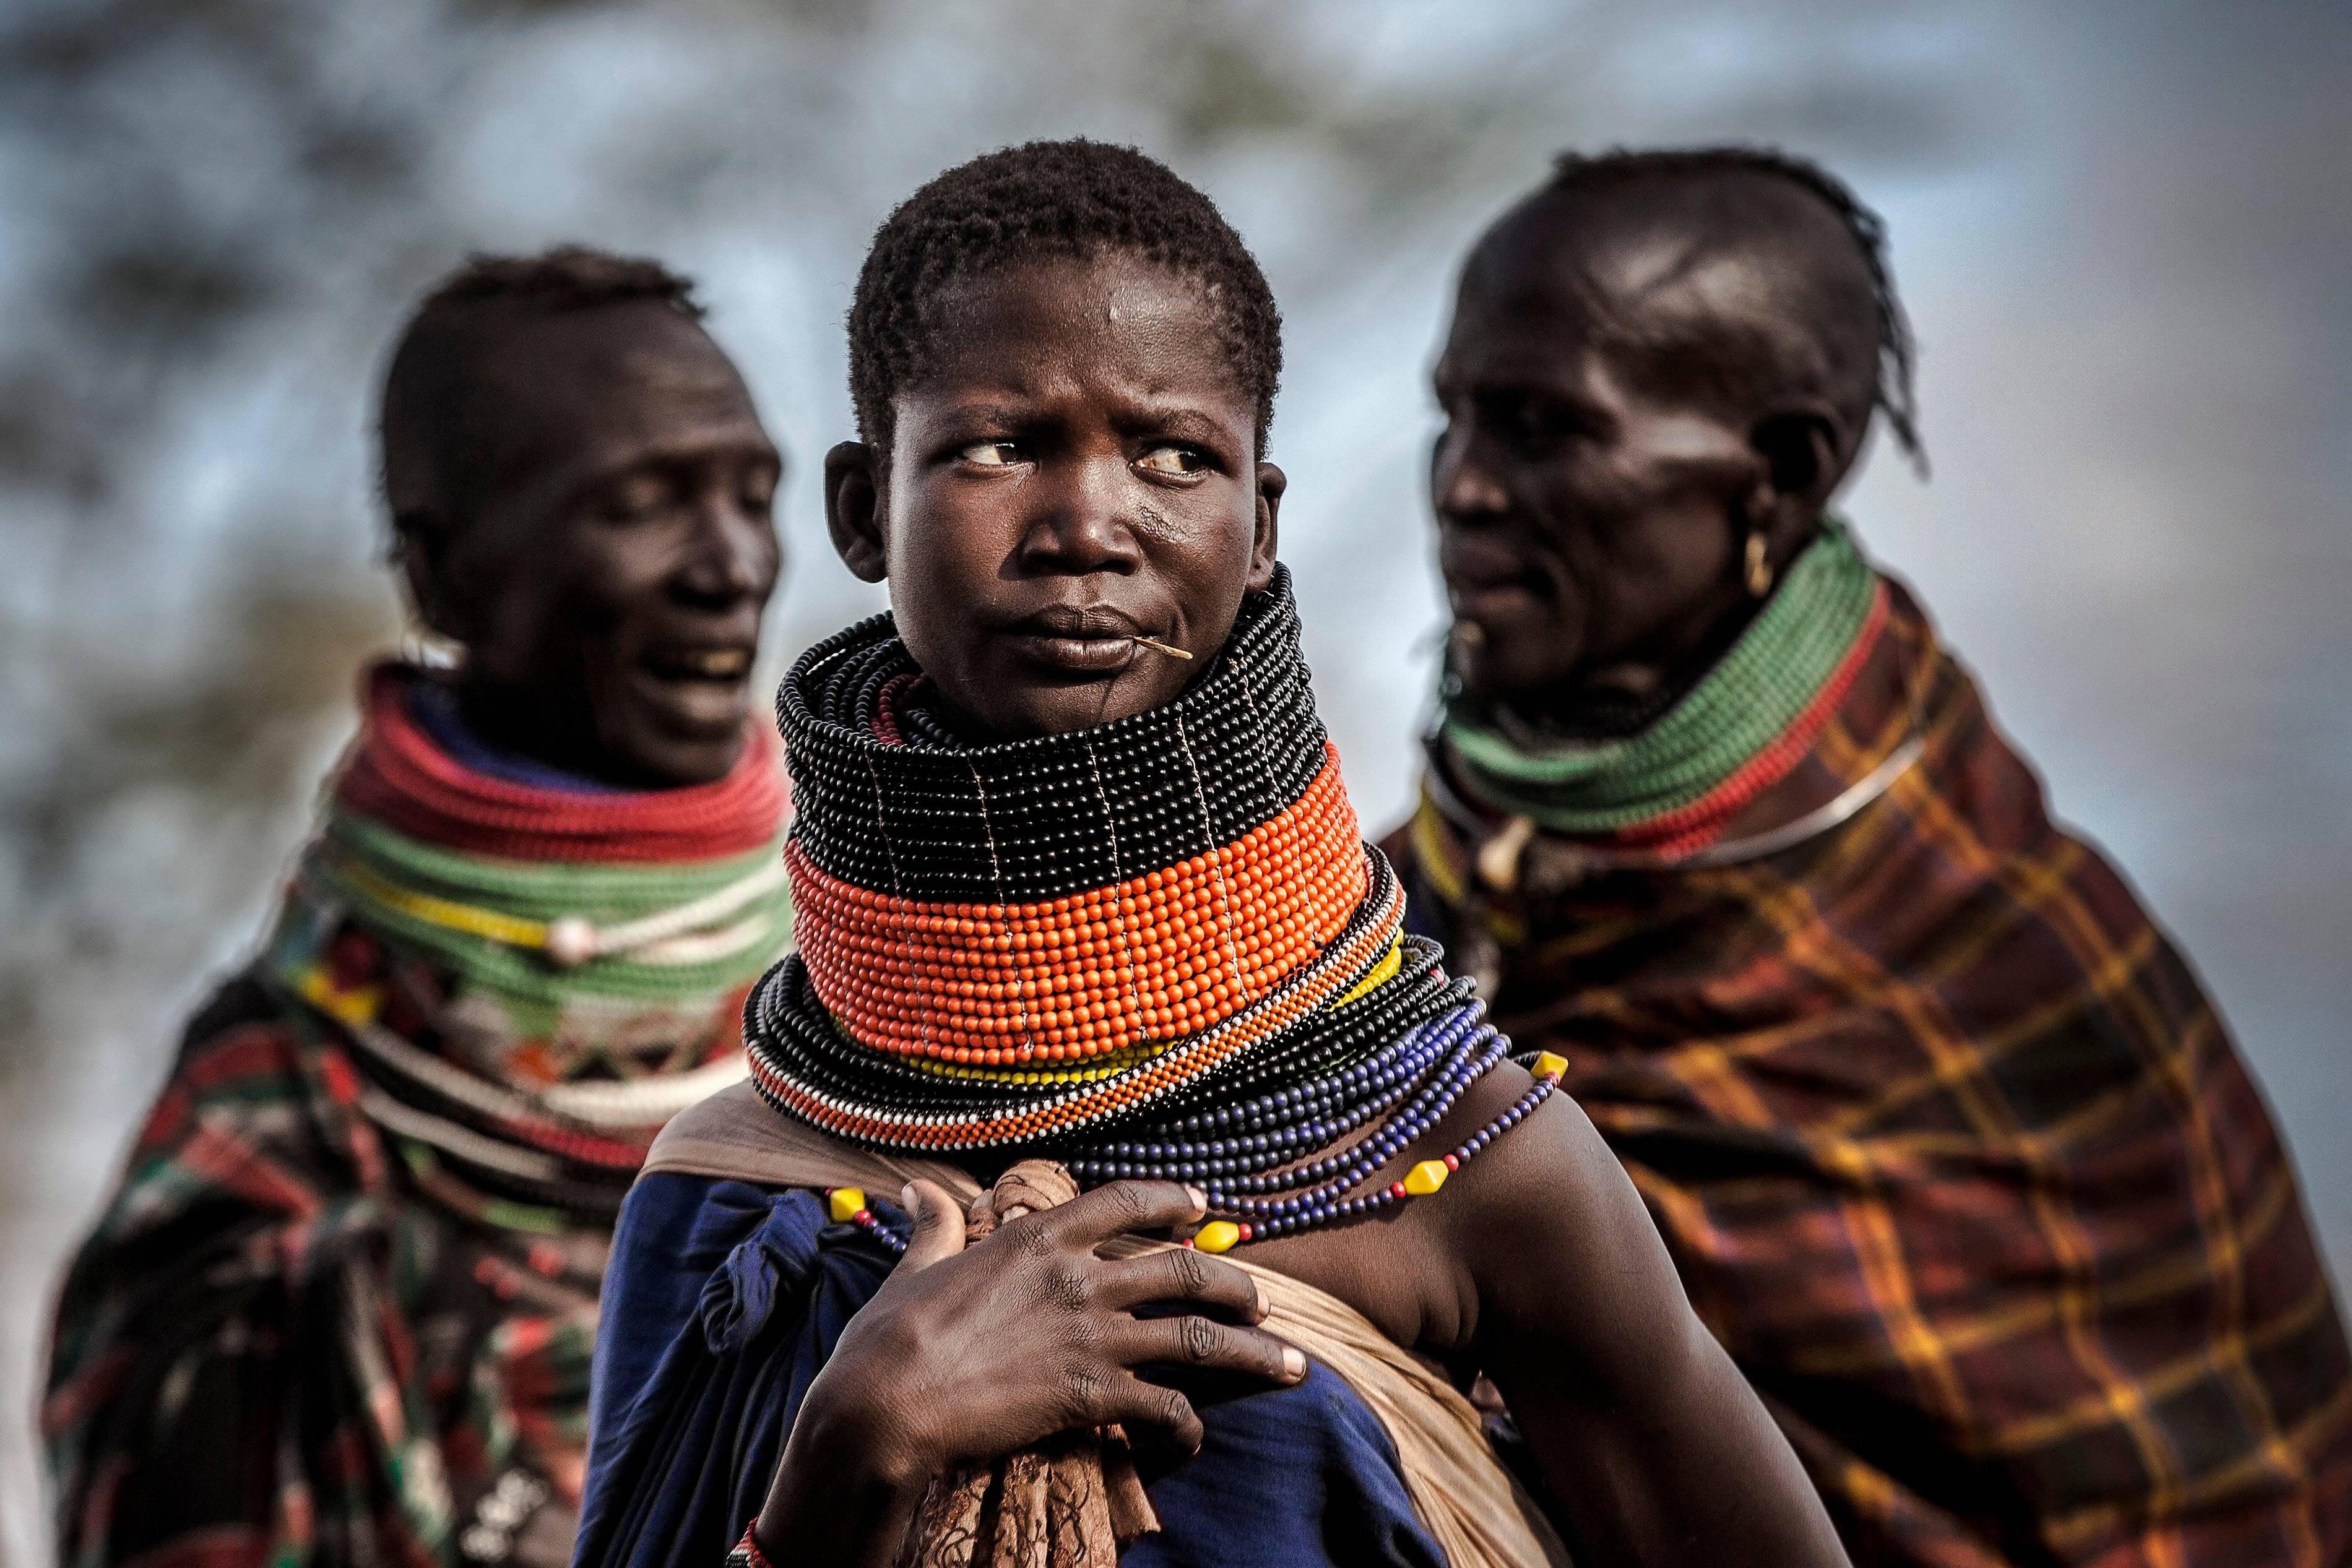 Women belonging to the Turkana community gather next to their village in an arid dry area in Morungole, Turkana County, Kenya, on October 7, 2019. Turkana is a vast, dry area in the north-west of Kenya that is on the frontline of climate change. With regular searing temperatures the Turkana people are suffering from recurring and prolonged droughts. (Photo by Luis TATO / AFP)